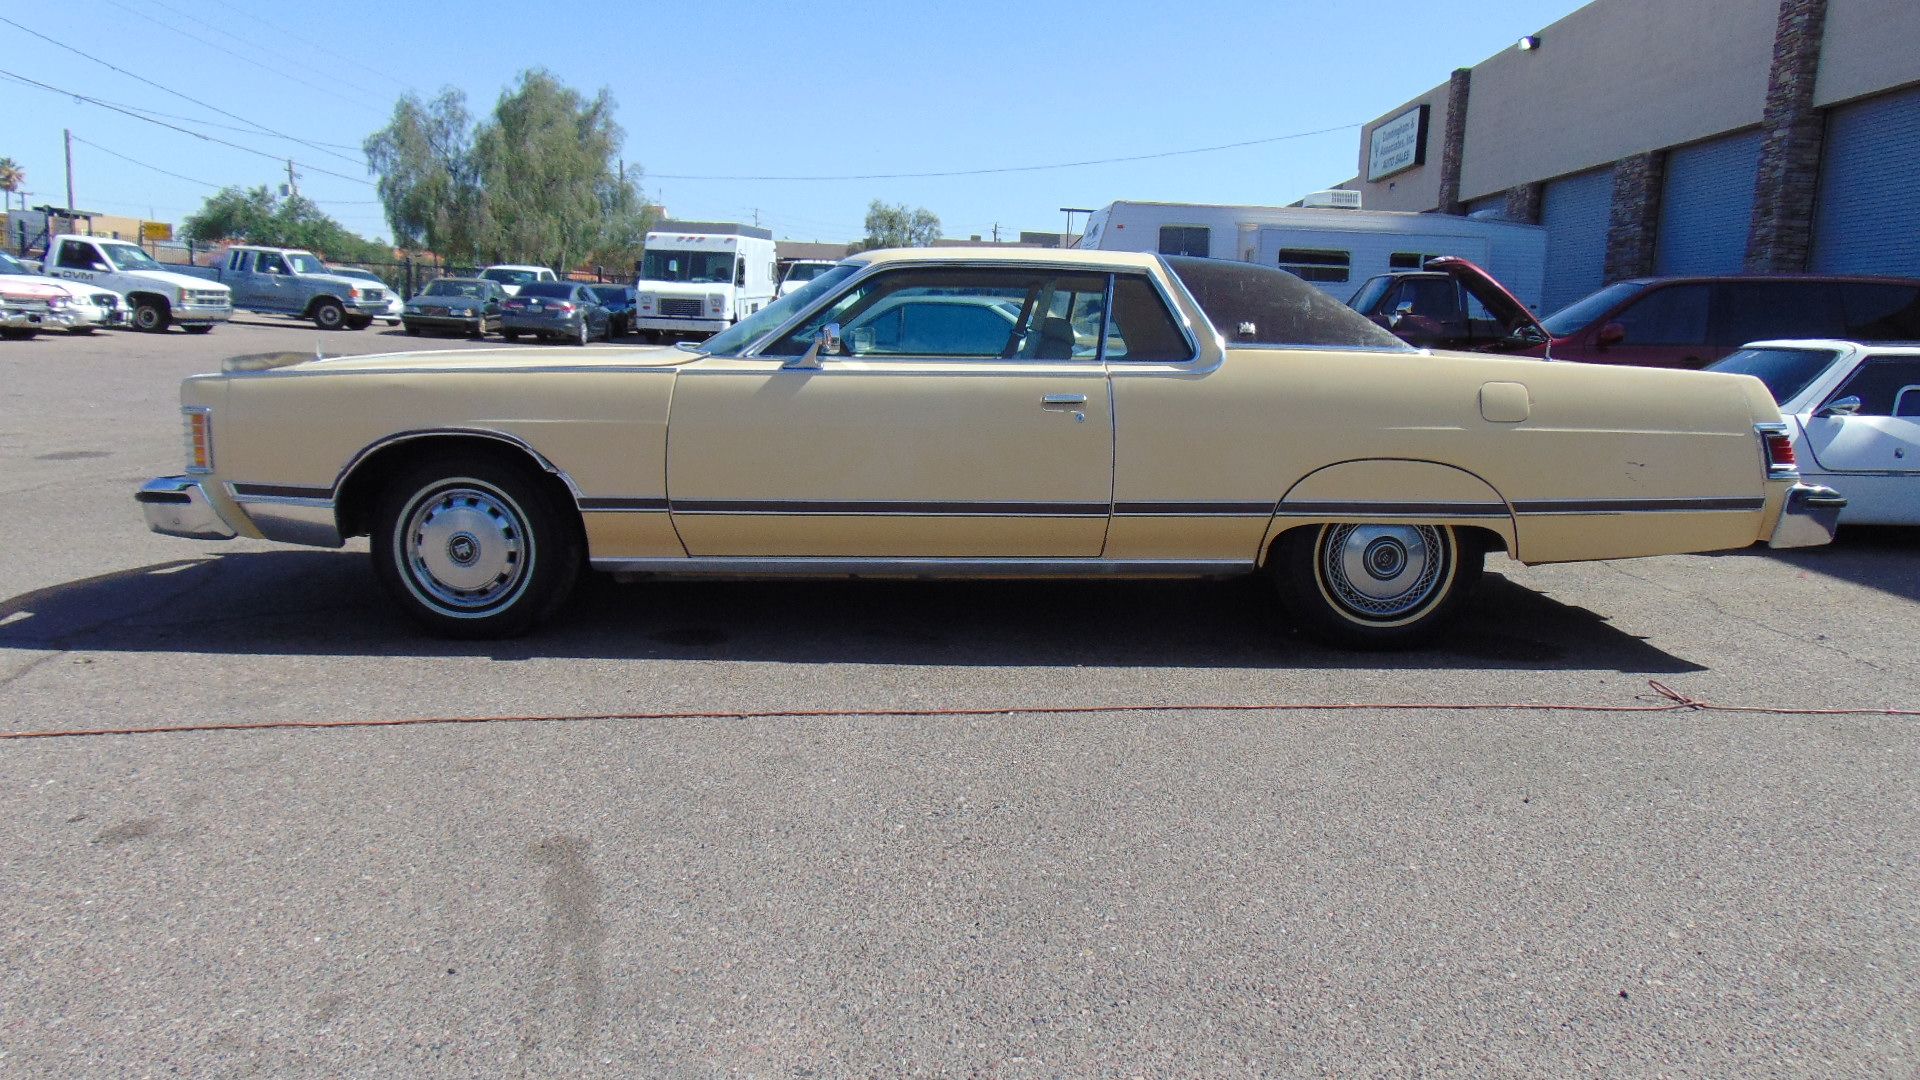 1978 MERCURY GRAND MARQUIS, ODOMETER READING 12,838, VIN. 8Z65S644505, 351M GAS, AUTO TRANS, FWD, CR - Image 2 of 13